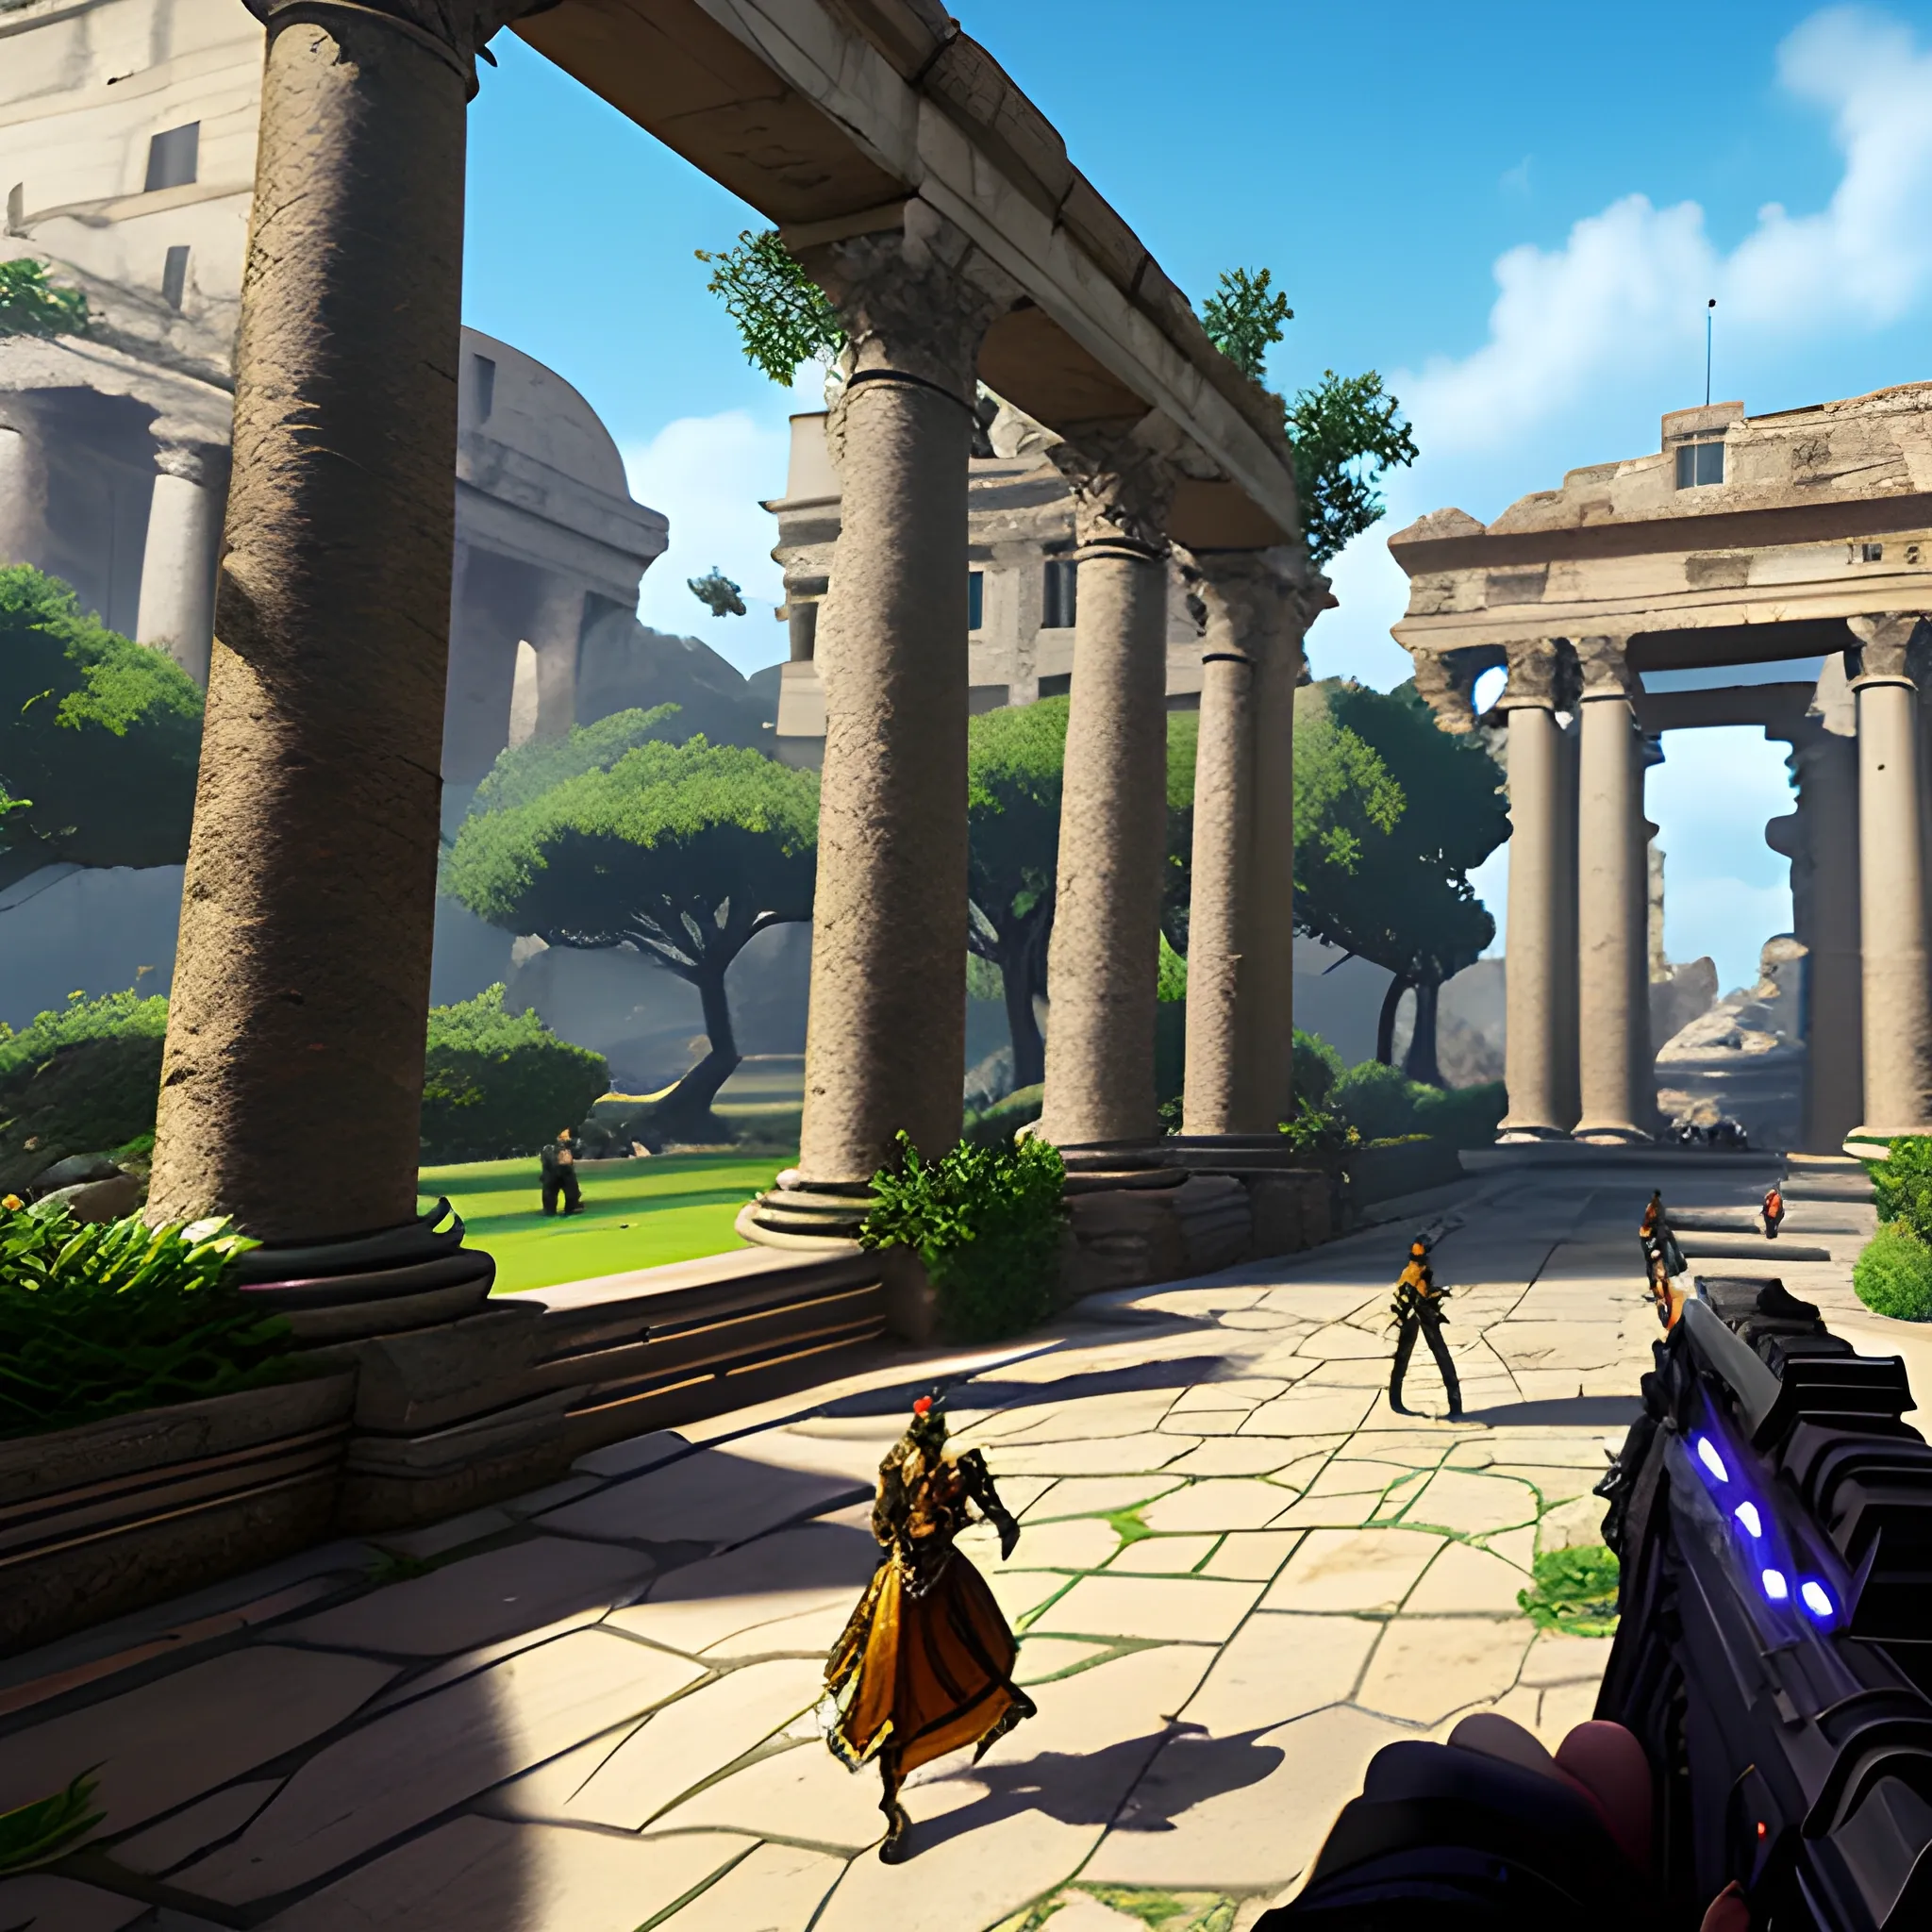 videogame screenshot with huge spangly sparkly assault rifle in foreground, with young mothers walking babies in a municipal gardens, in the ancient world, very detailed